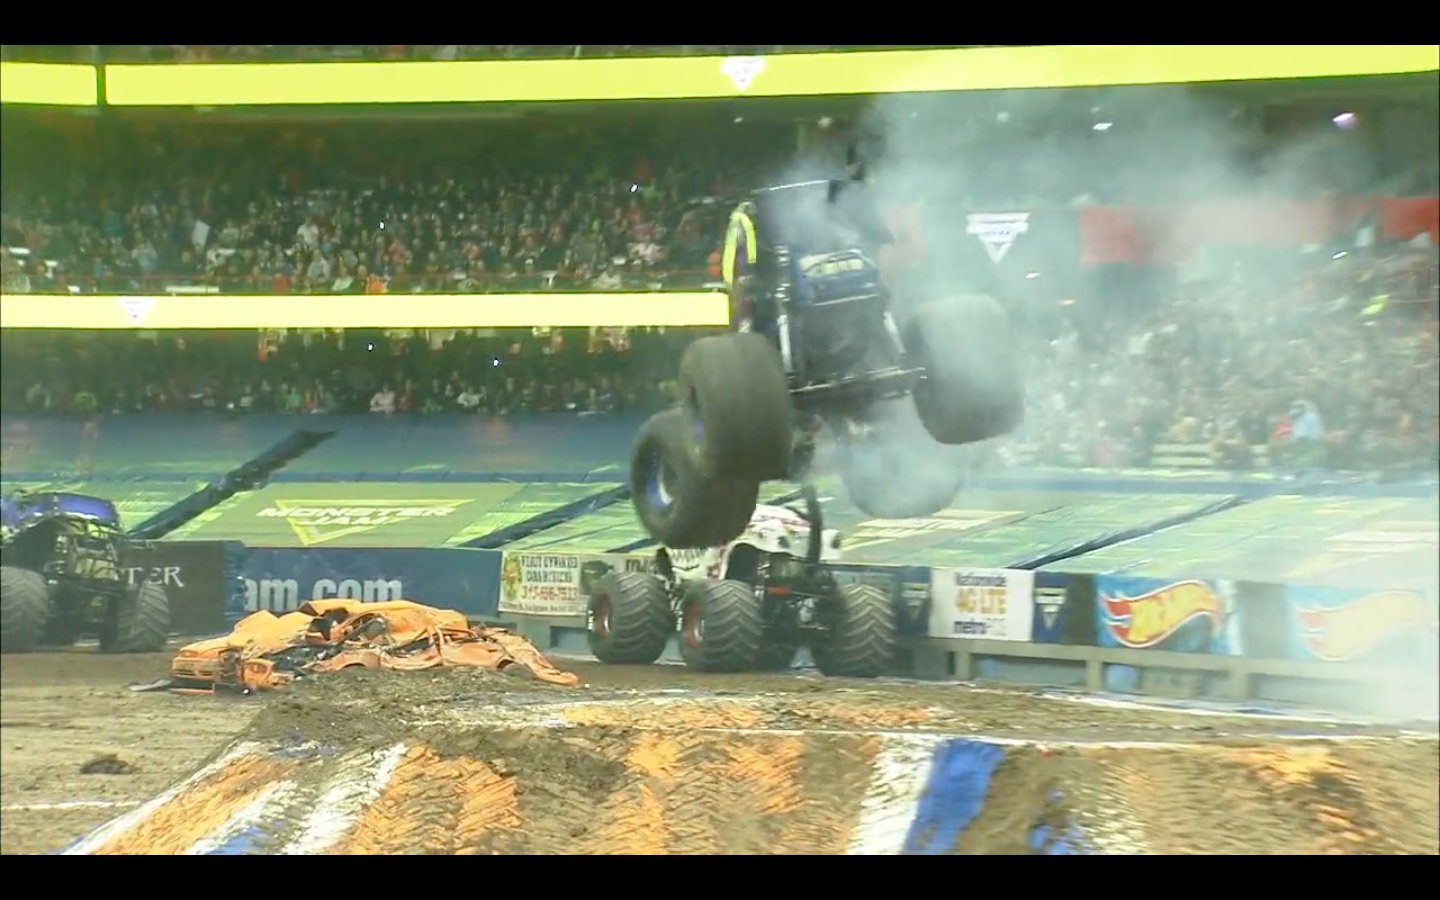 Monster Jam roaring back to Syracuse: How to get tickets for JMA